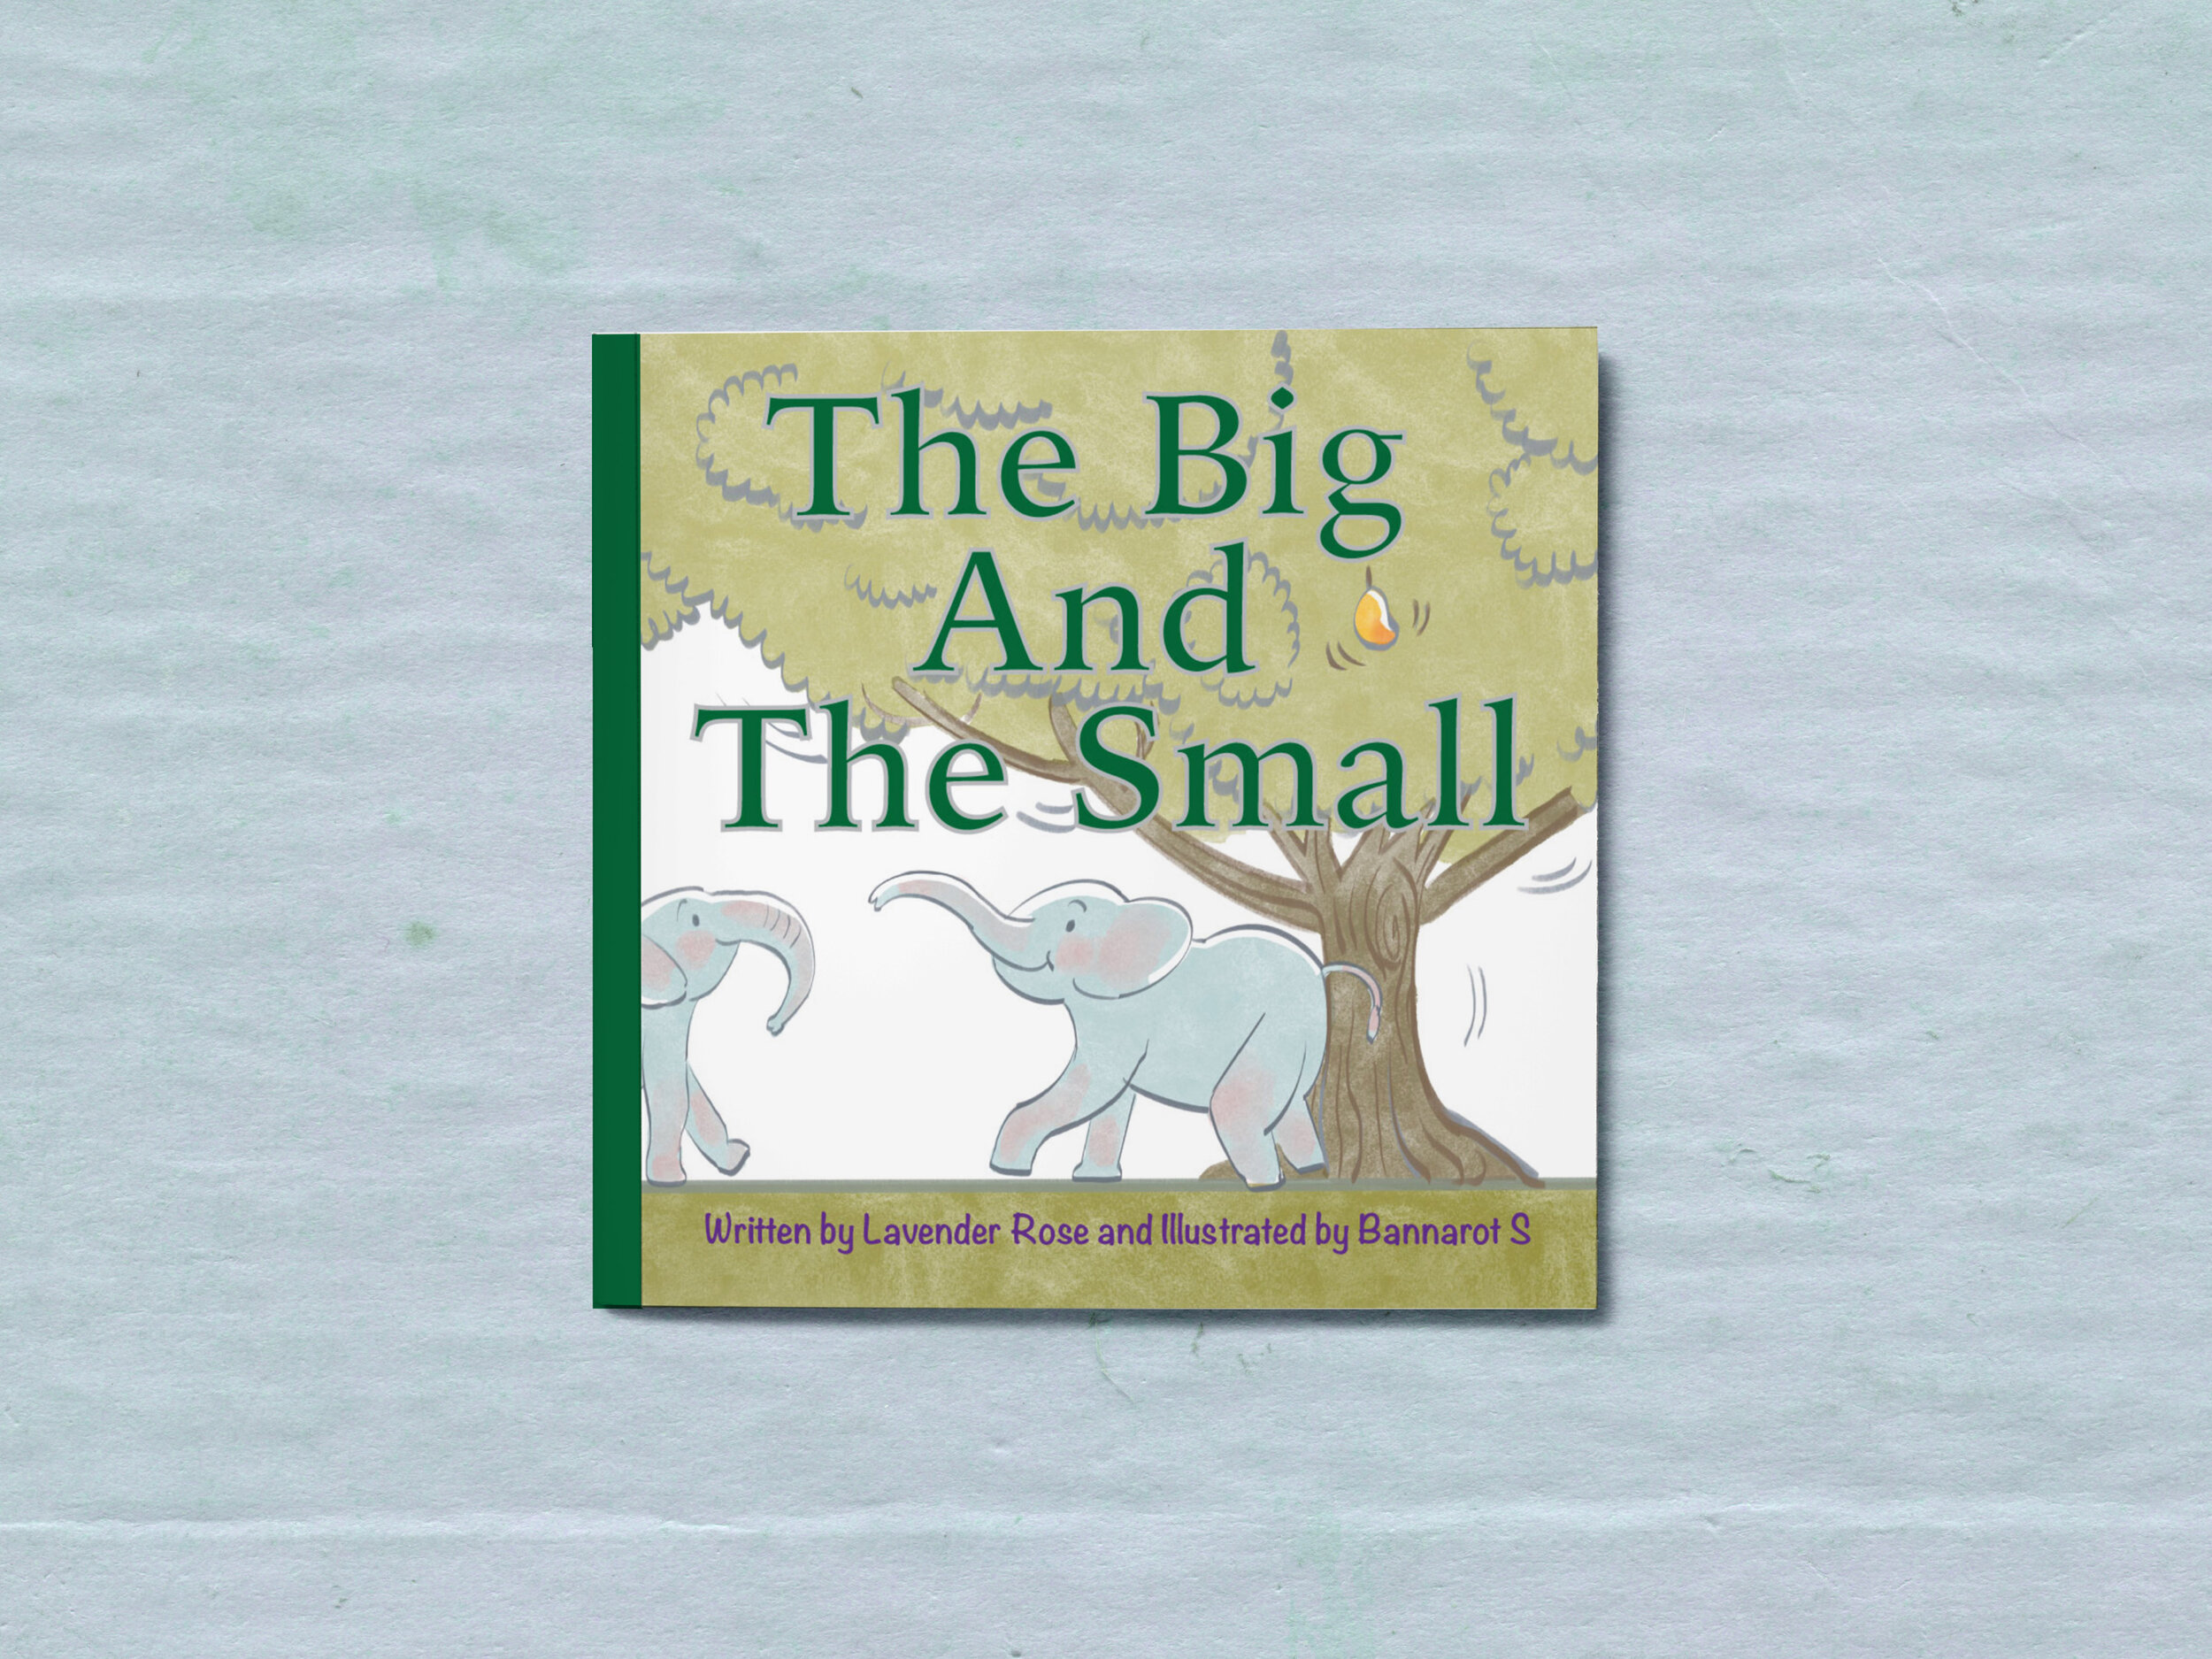 A5-Book-MockUp-The-Big-And-The-Small.jpg